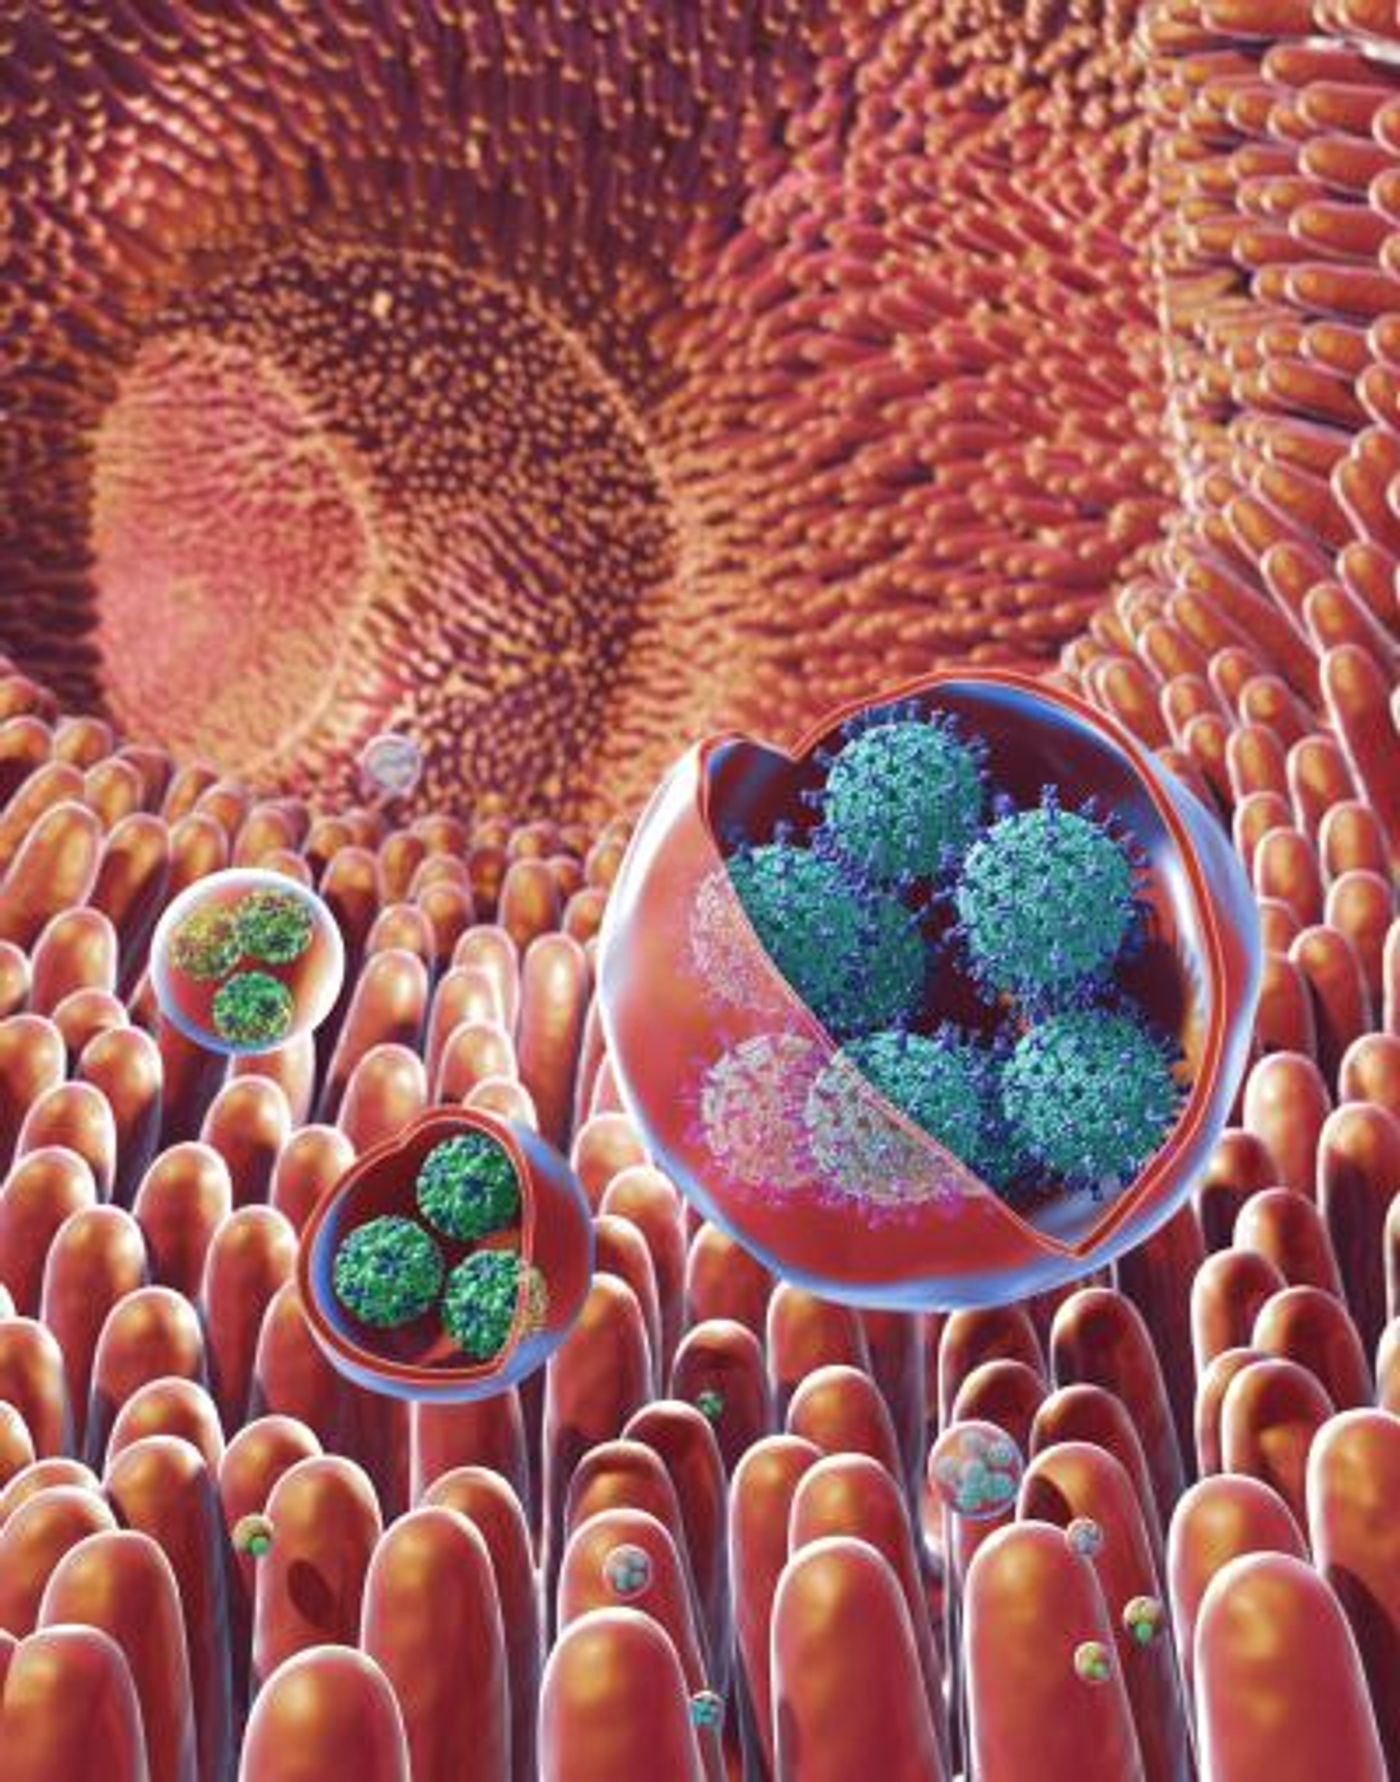 This is an illustration of membrane-bound vesicles containing clusters of viruses, including rotavirus and norovirus, within the gut. Rotaviruses are shown in the large vesicles, while noroviruses are shown in the smaller vesicles. / Credit: NIH